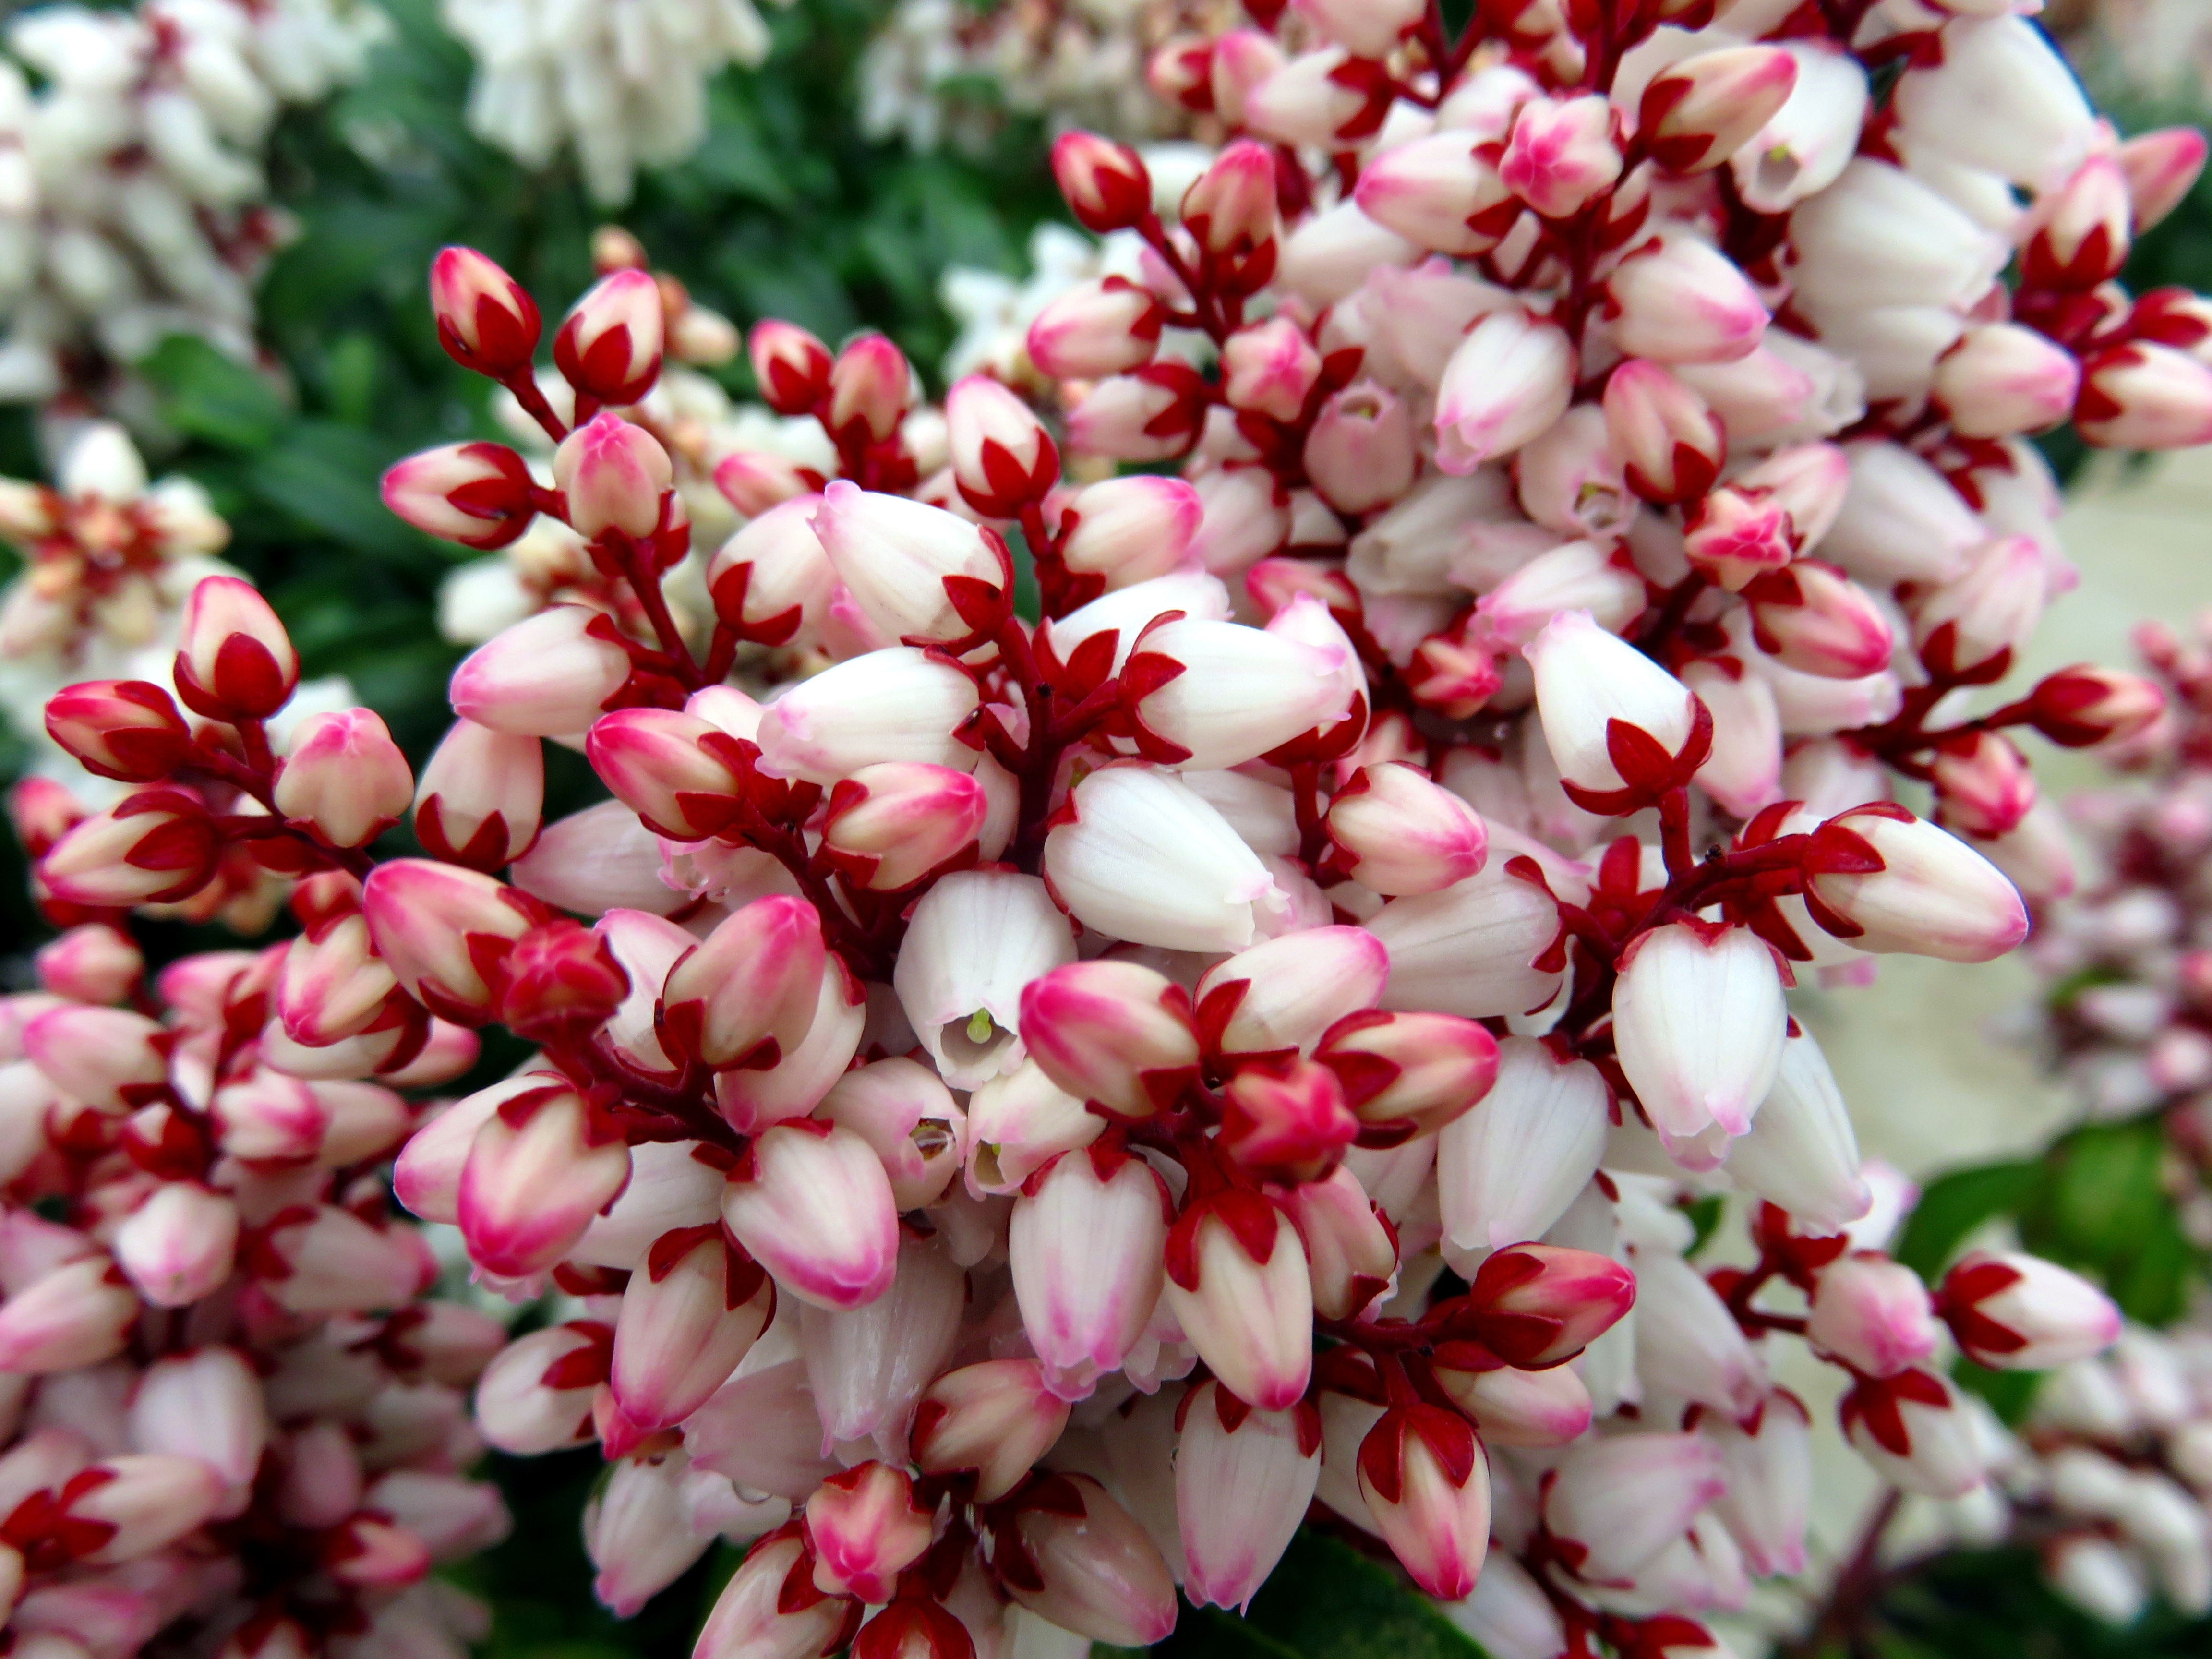 pink-red-and-white petaled flowers